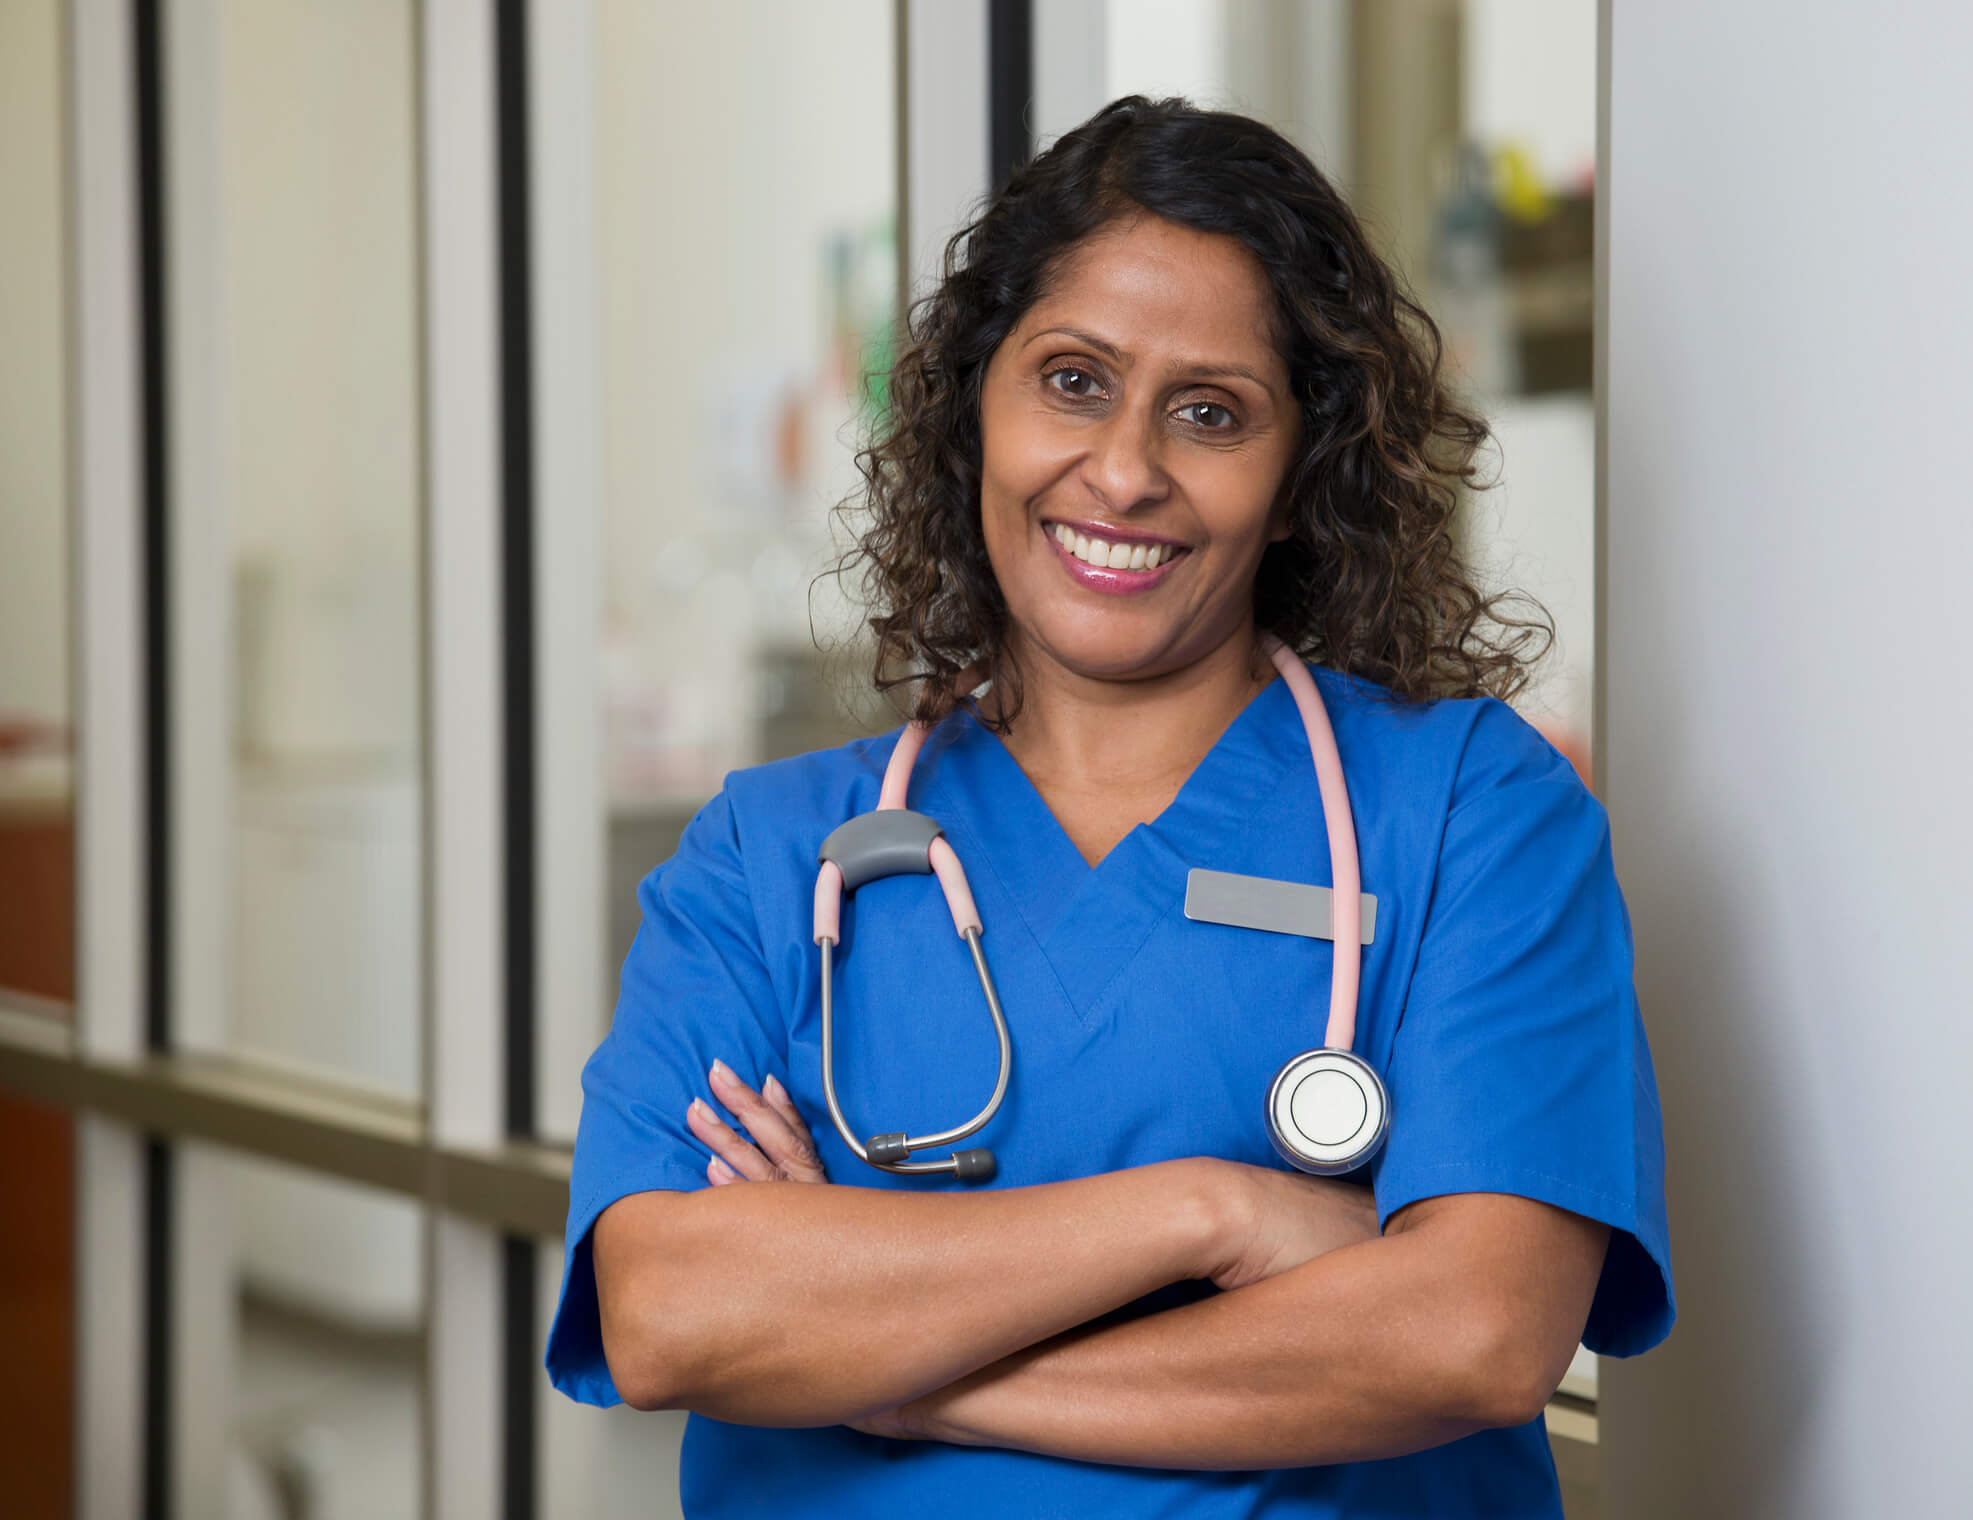 Female Indian-American nurse smiling while standing in a hospital lobby